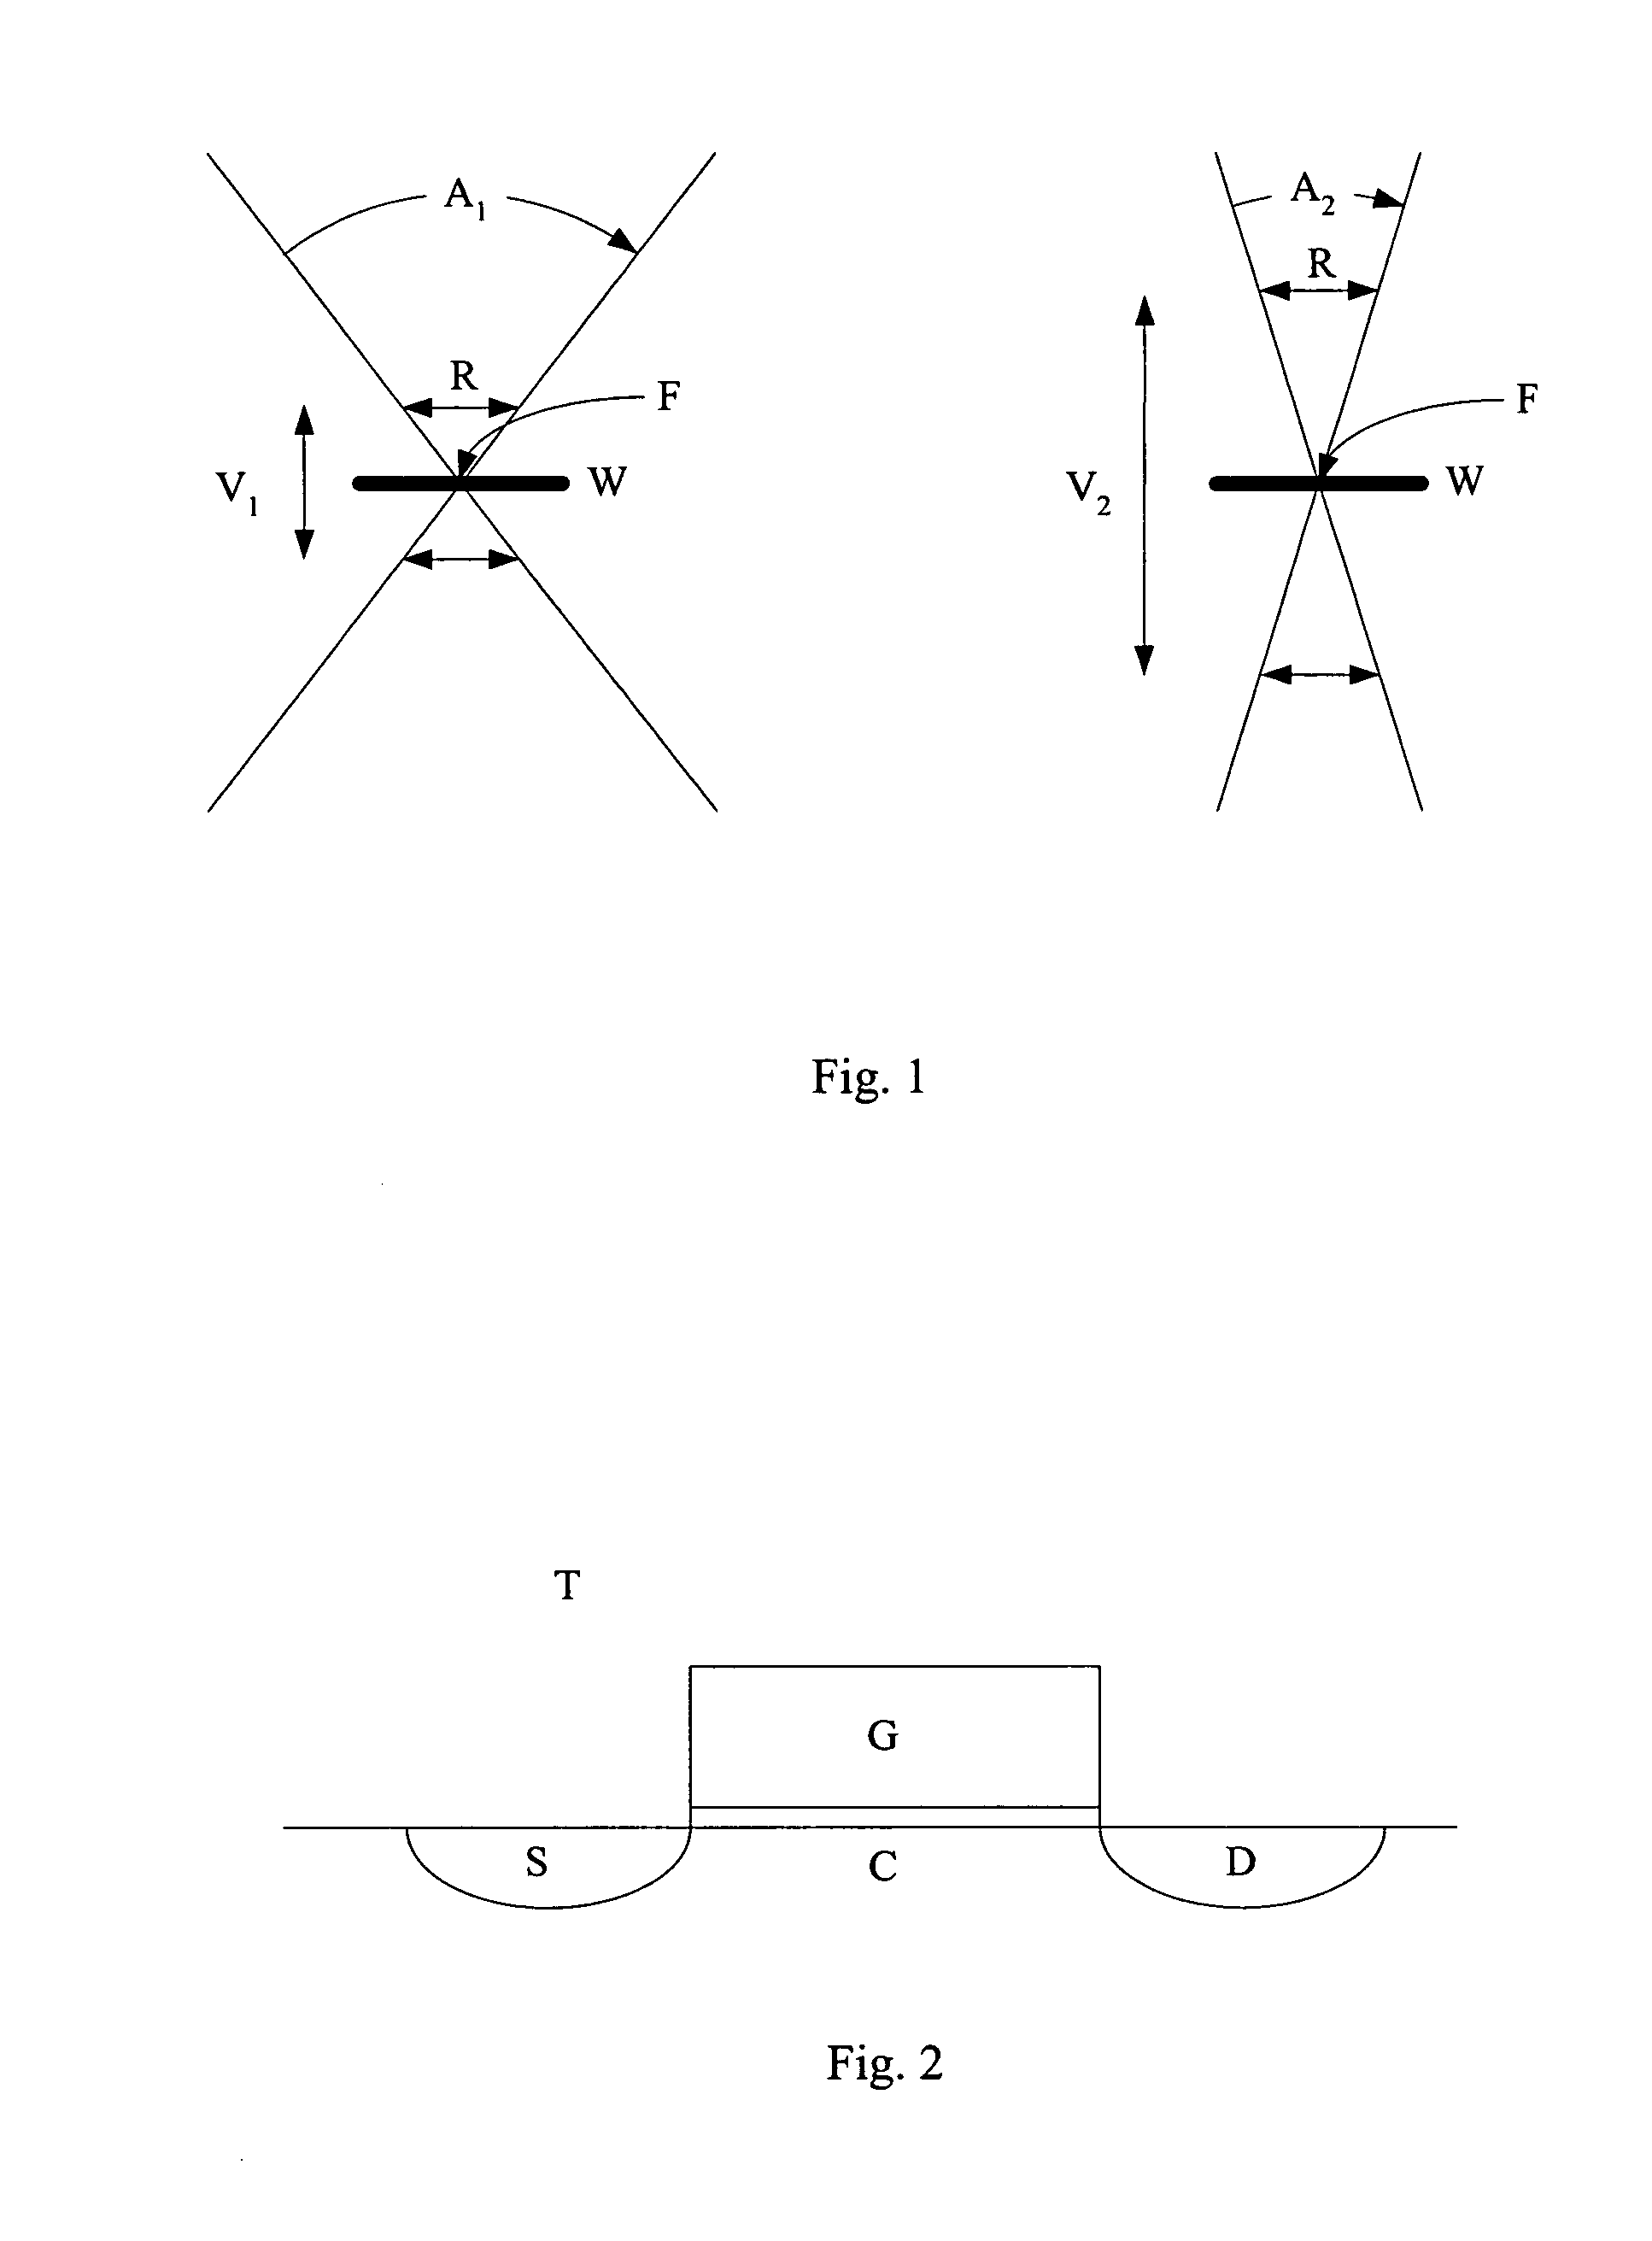 Optimization of critical dimensions and pitch of patterned features in and above a substrate